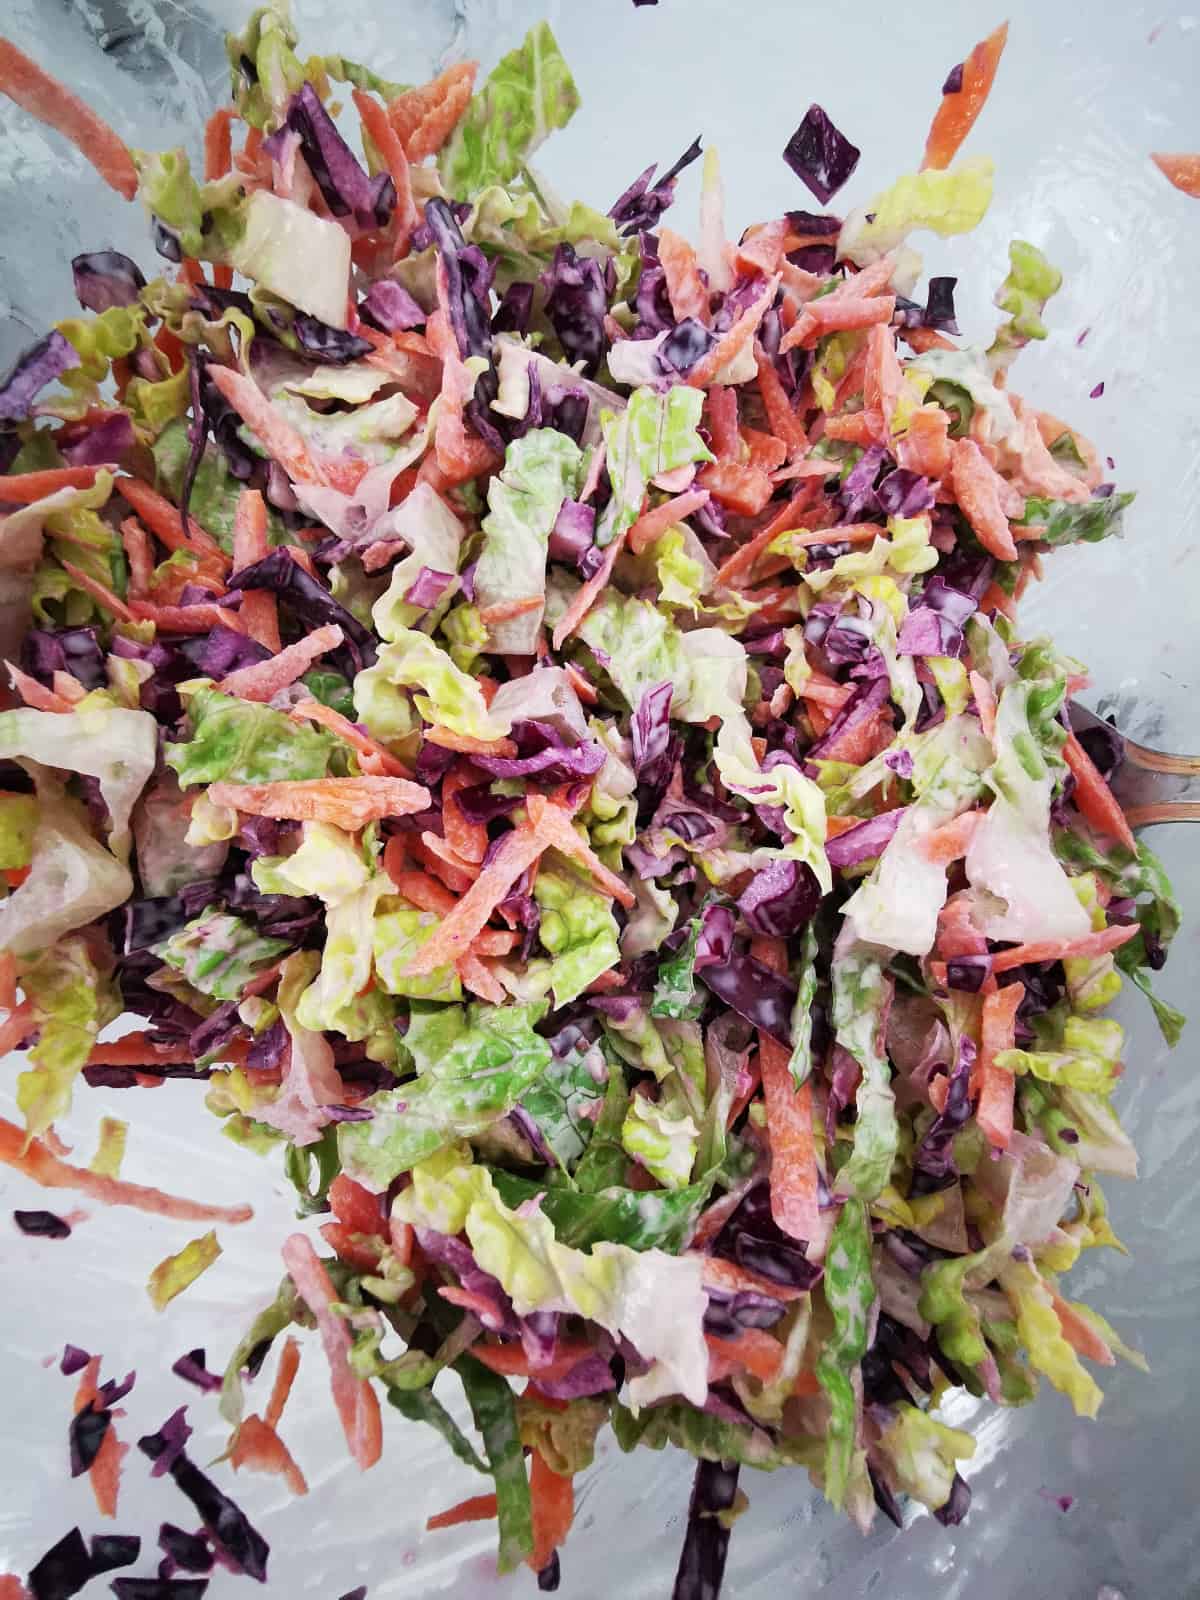 coleslaw inside a large glass mixing bowl.